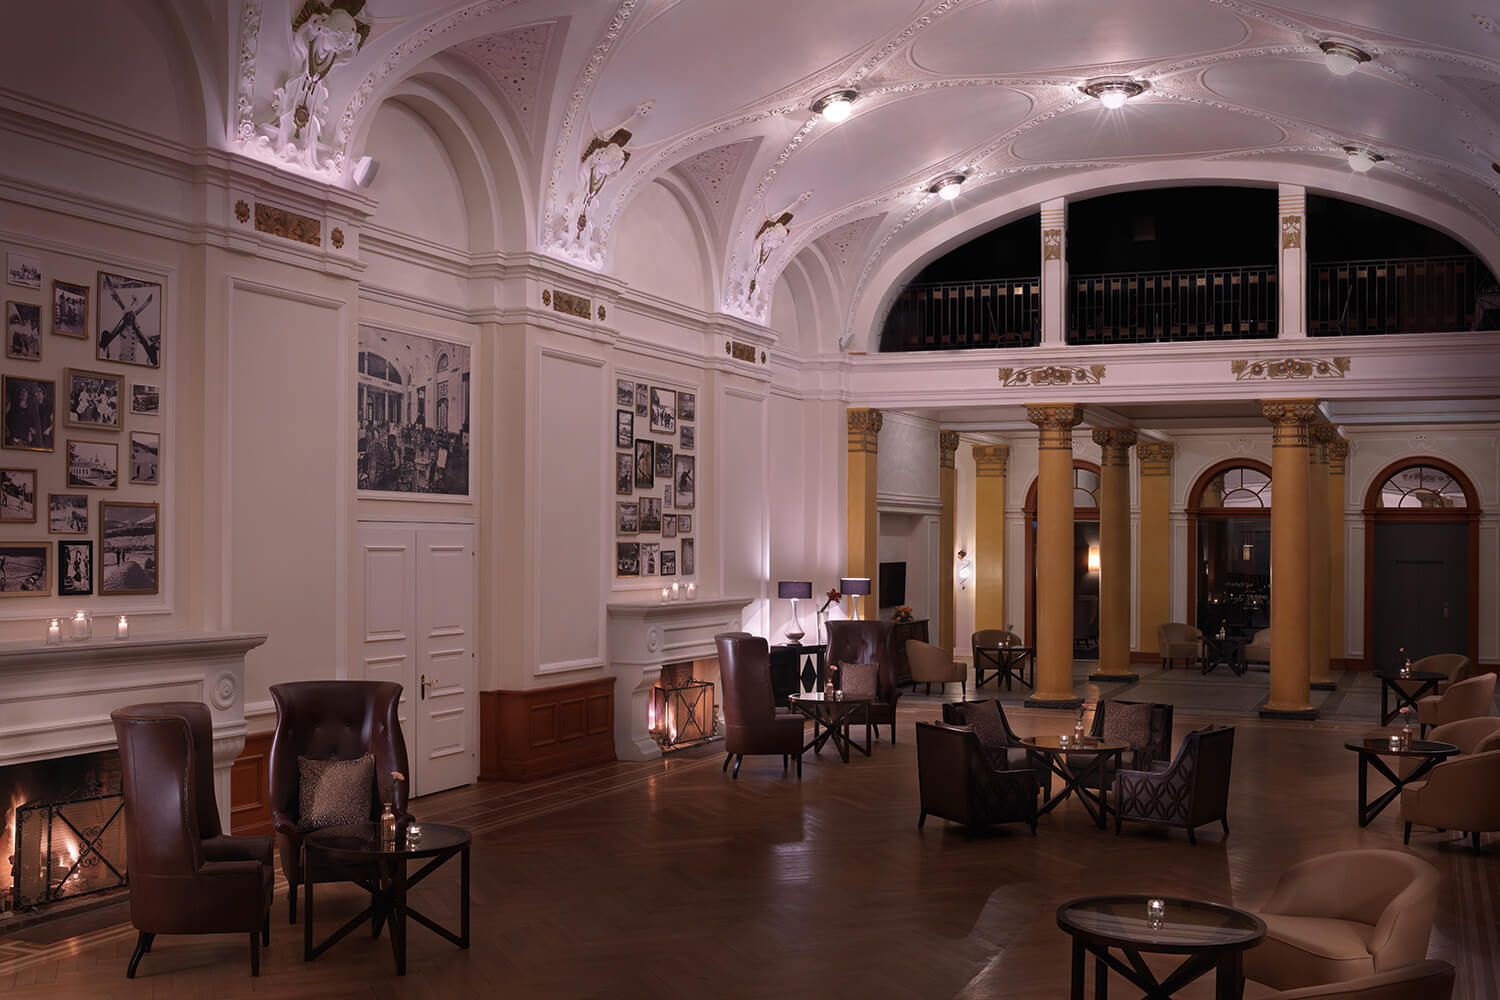 Belle Époque pavilion interior with high curved decretive ceiling, lounge seating area, historic photographs on the wall and fire place